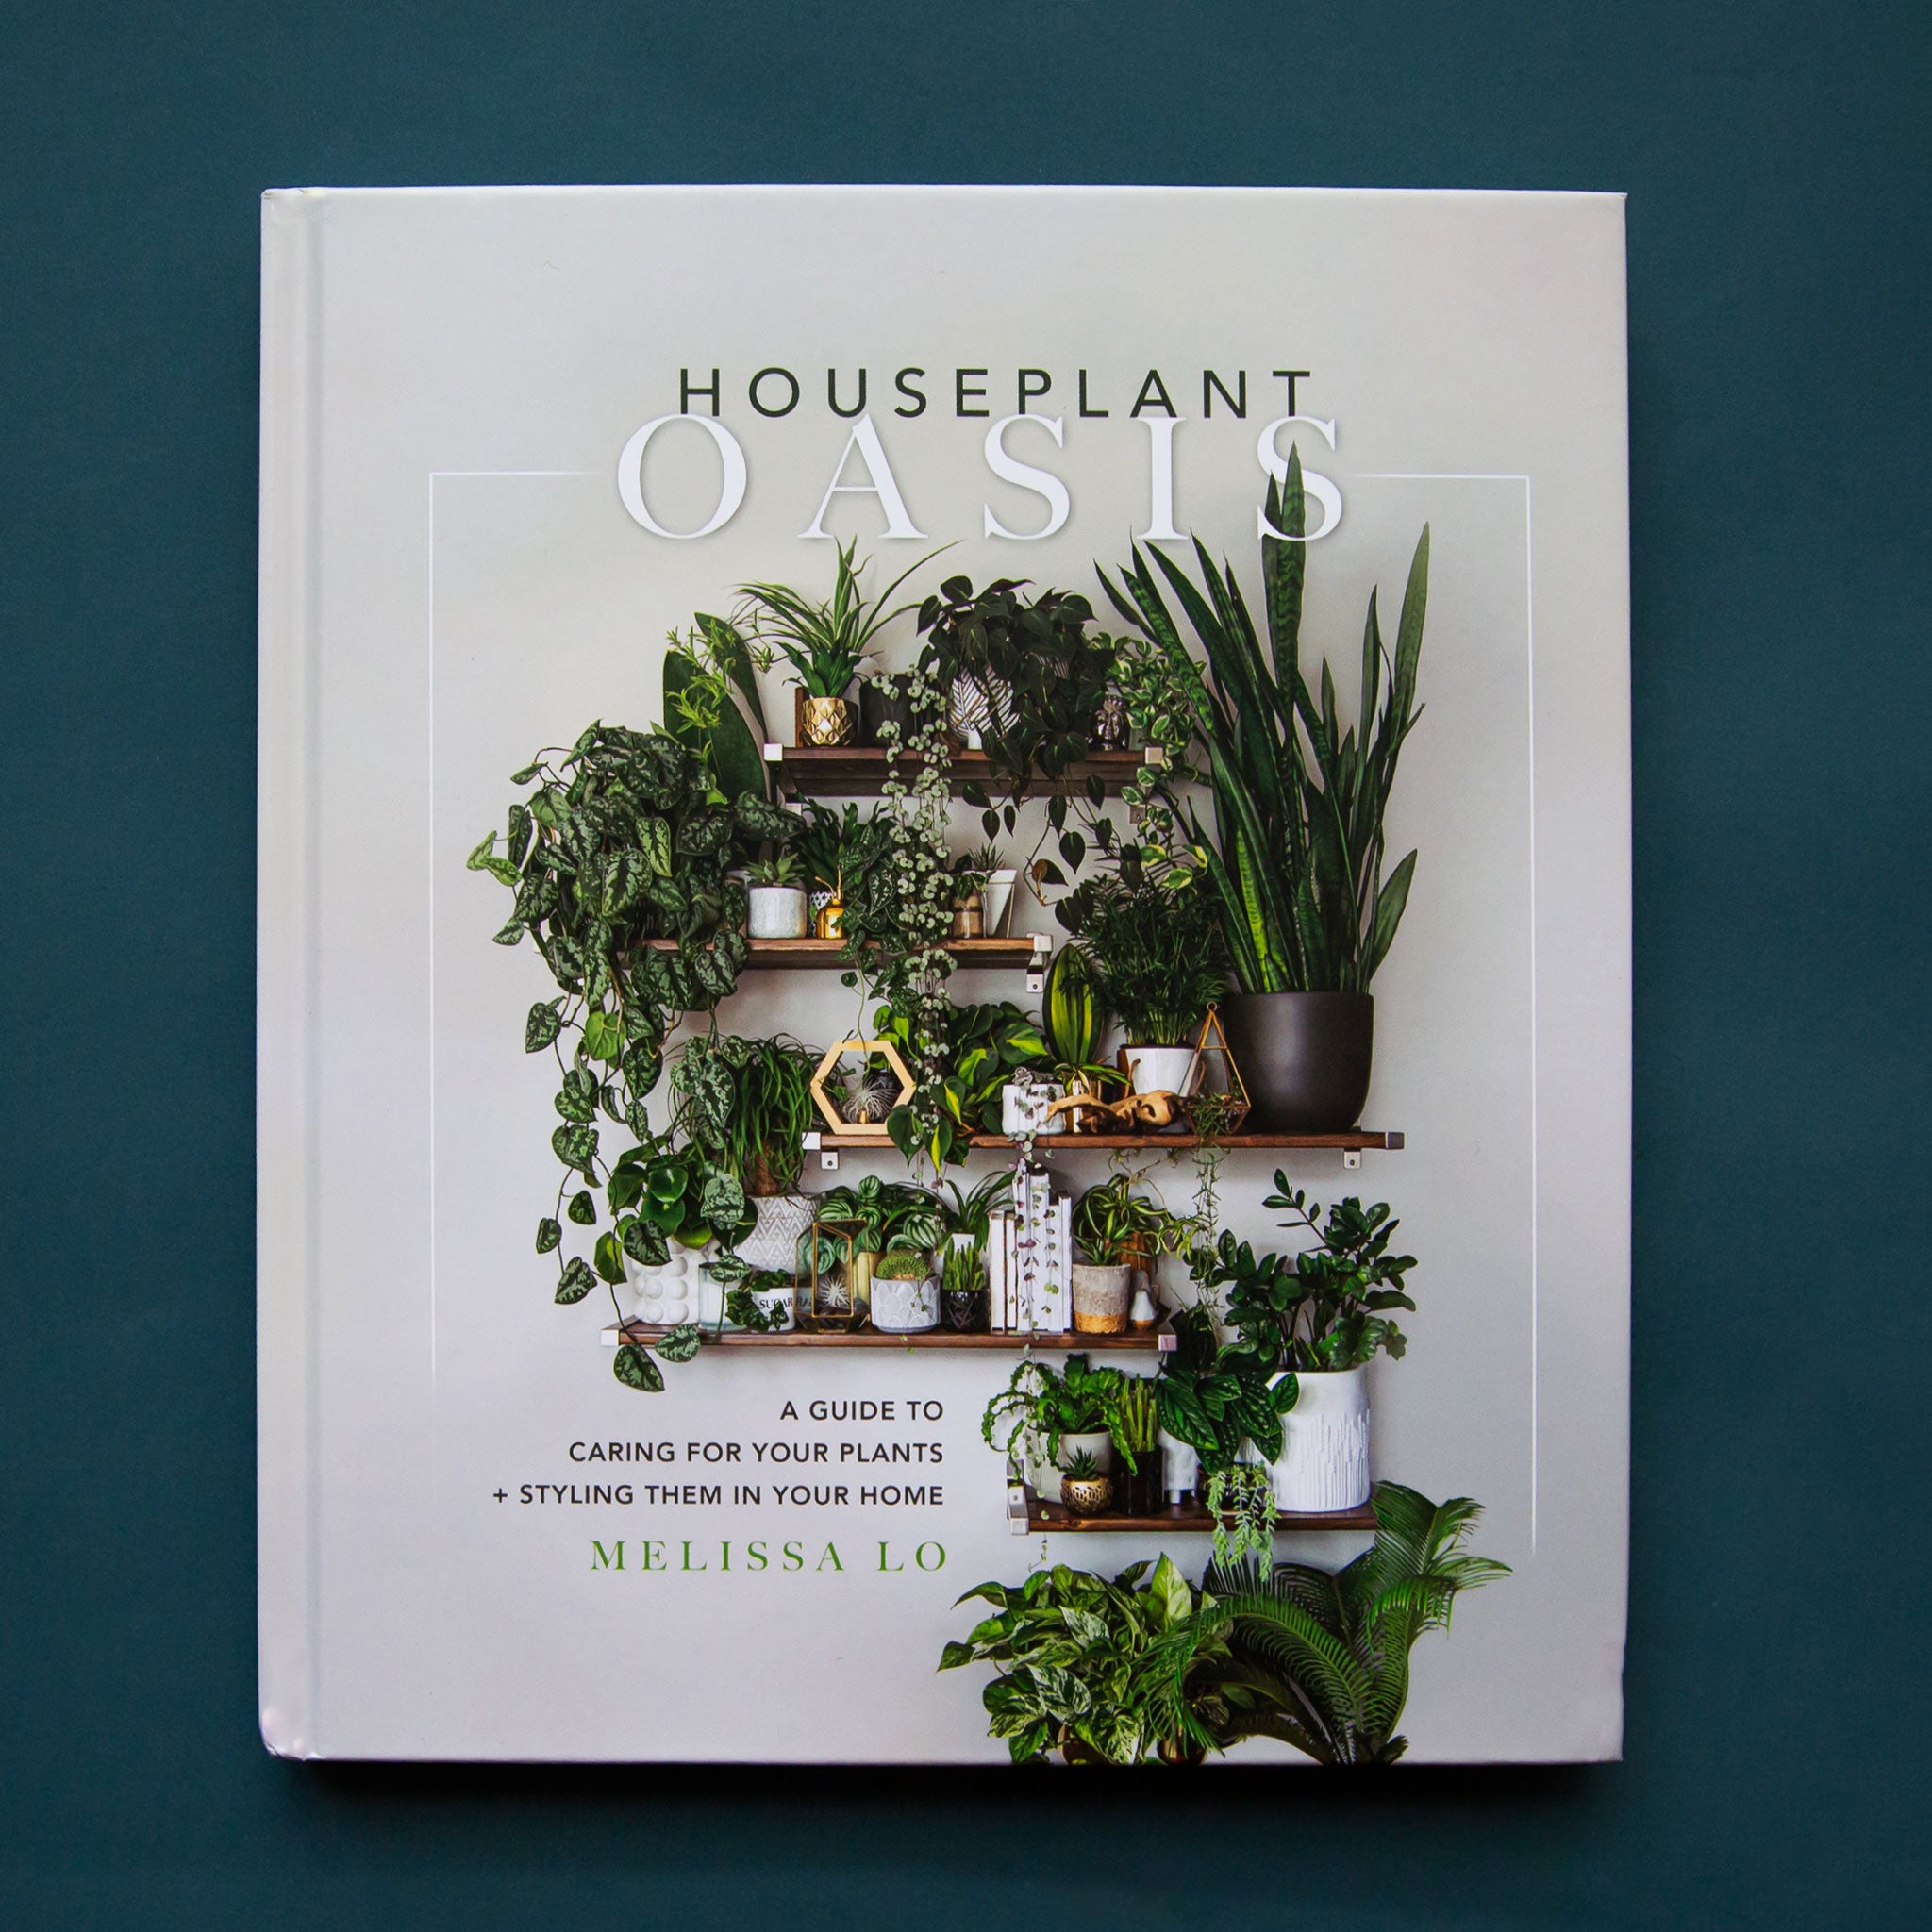 On a blue background is a light grey book cover with a photograph of various houseplants on shelves and the title at the top that reads, "Houseplant Oasis" in black and white letters.